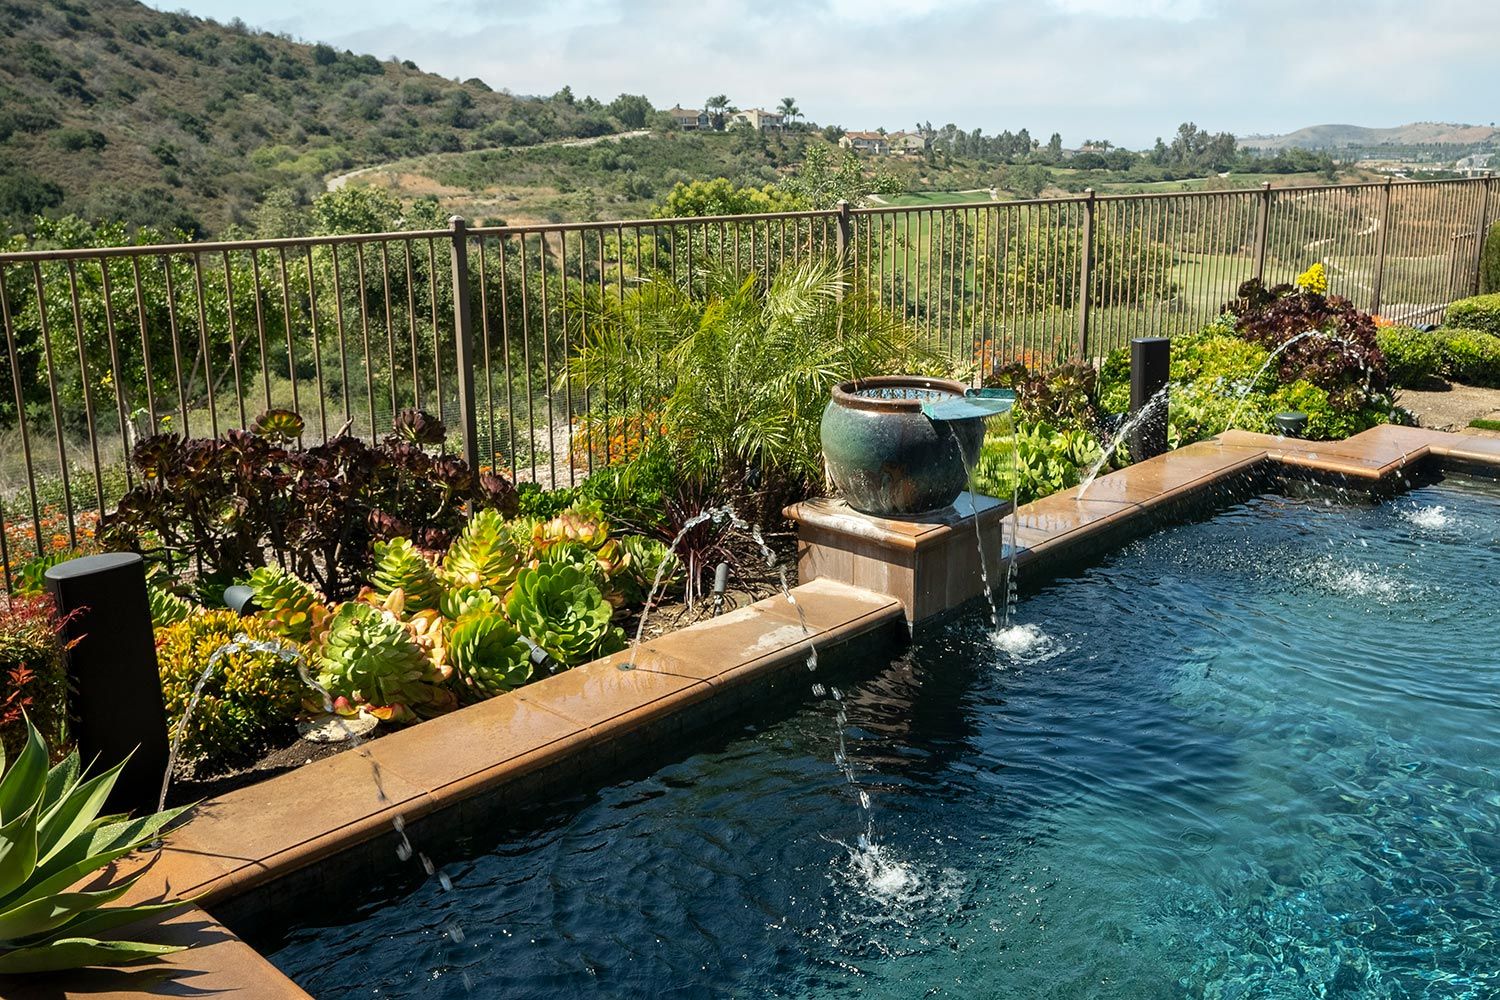 Pool with water fountains and James Loudspeaker outdoor speakers, surrounded by lush greenery and a scenic hilly background.